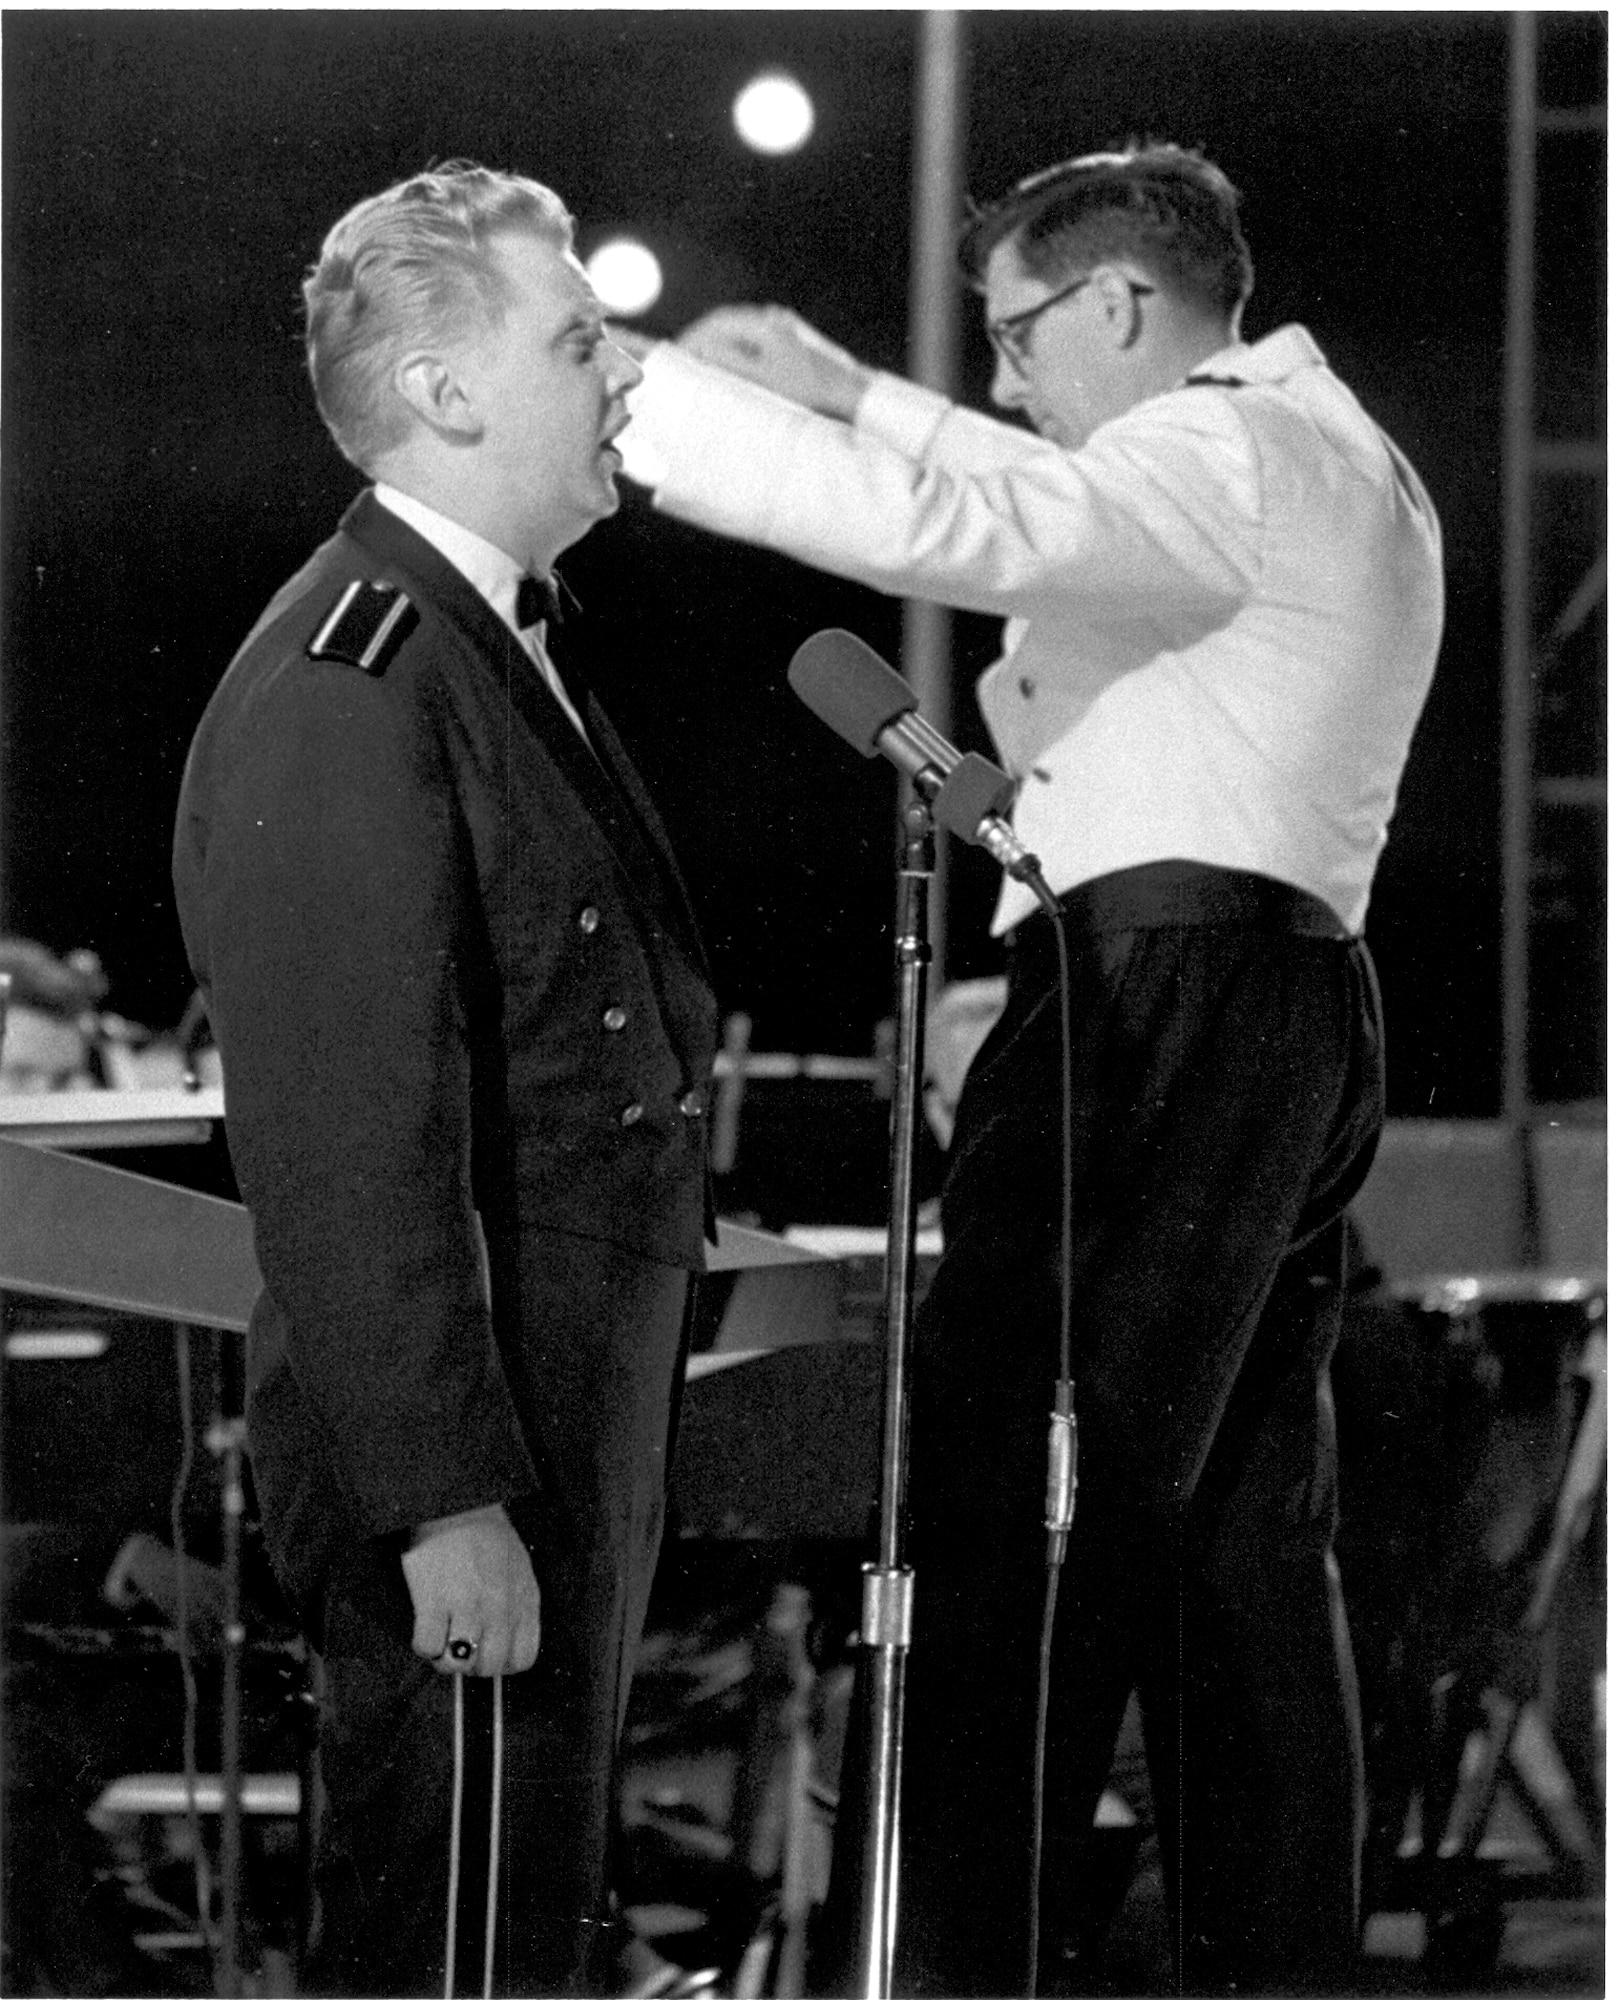 Vocalist Chuck Kuliga solos with The United States Air Force Band in an outdoor summer concert in 1968 or 1969 on the East side of the Capitol Building.  The conductor is Captain Albert A. Bader, assistant conductor to Lieutenant Colonel Arnald D. Gabriel, The Air Force Band's commander and conductor.  (Official photo of The Air Force Band.)